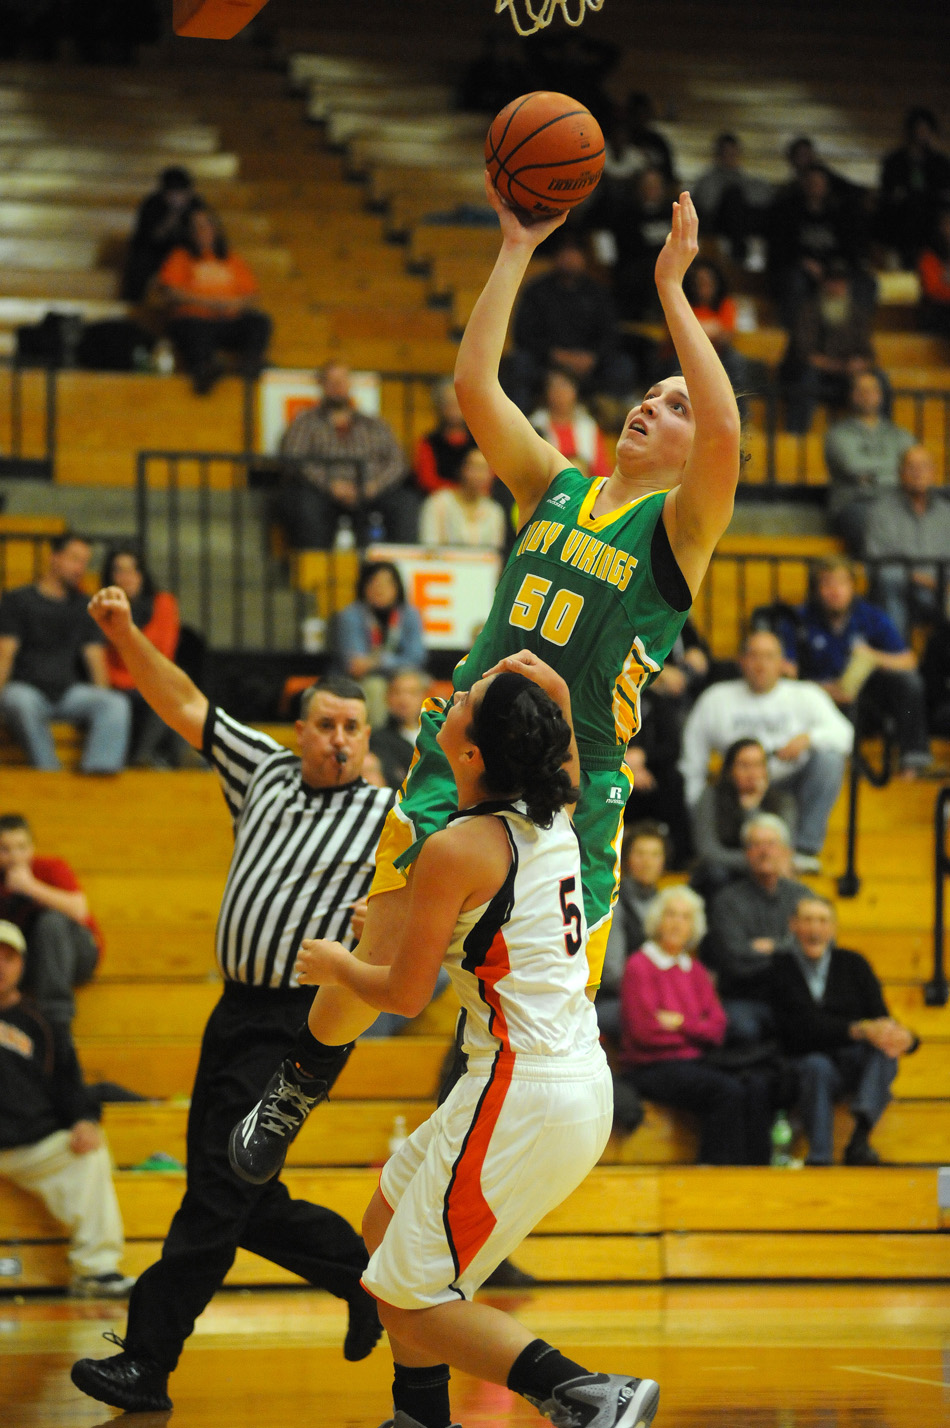 Tippecanoe Valley's Anne Secrest skies for a shot attempt over Warsaw's Page Desenberg. (Photos by Mike Deak)